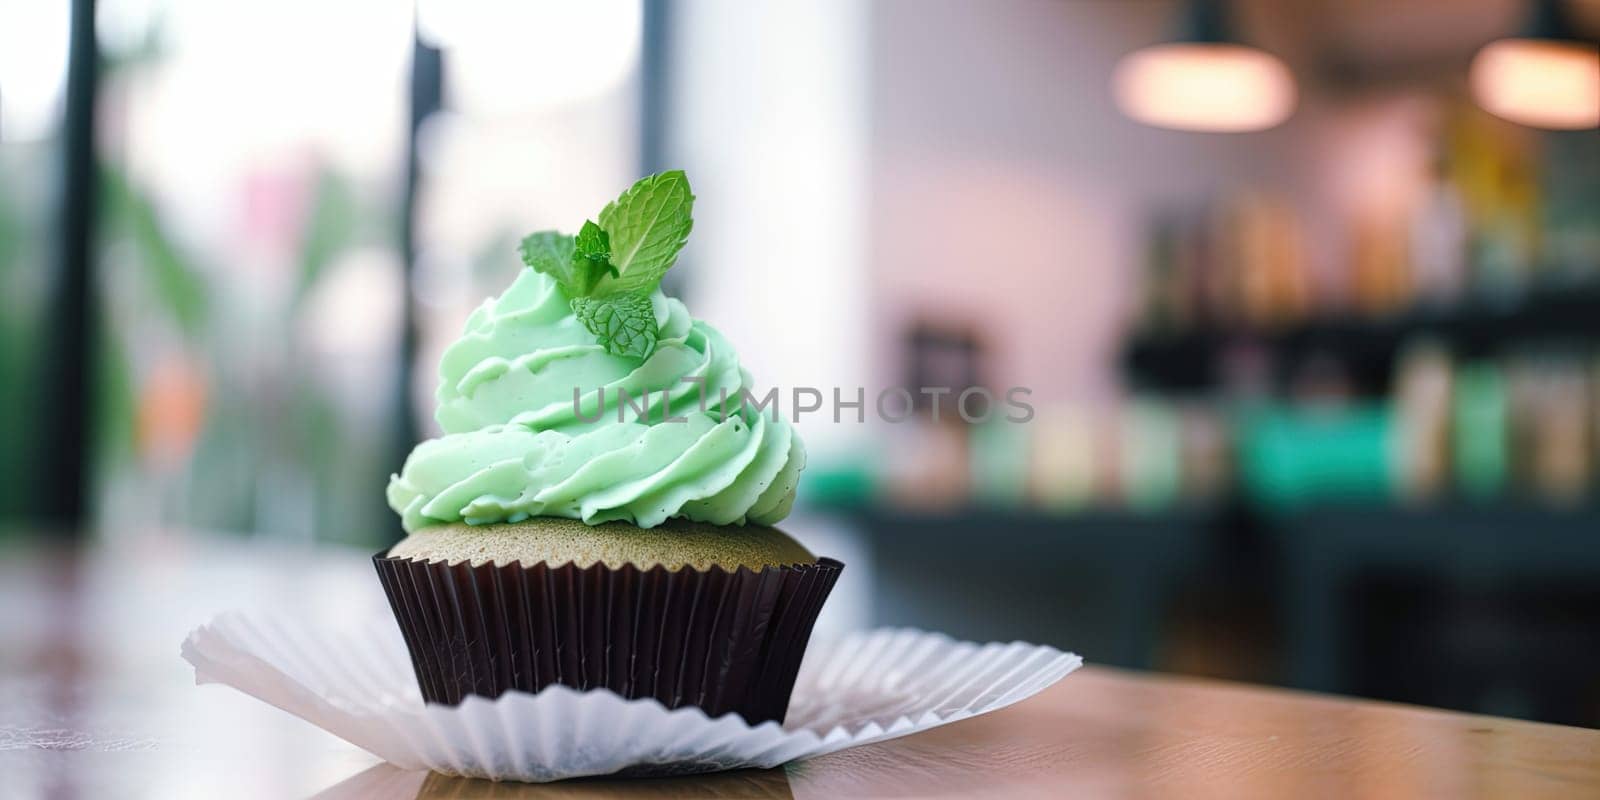 Close-up of a green cupcake on a cafe table with blurred background